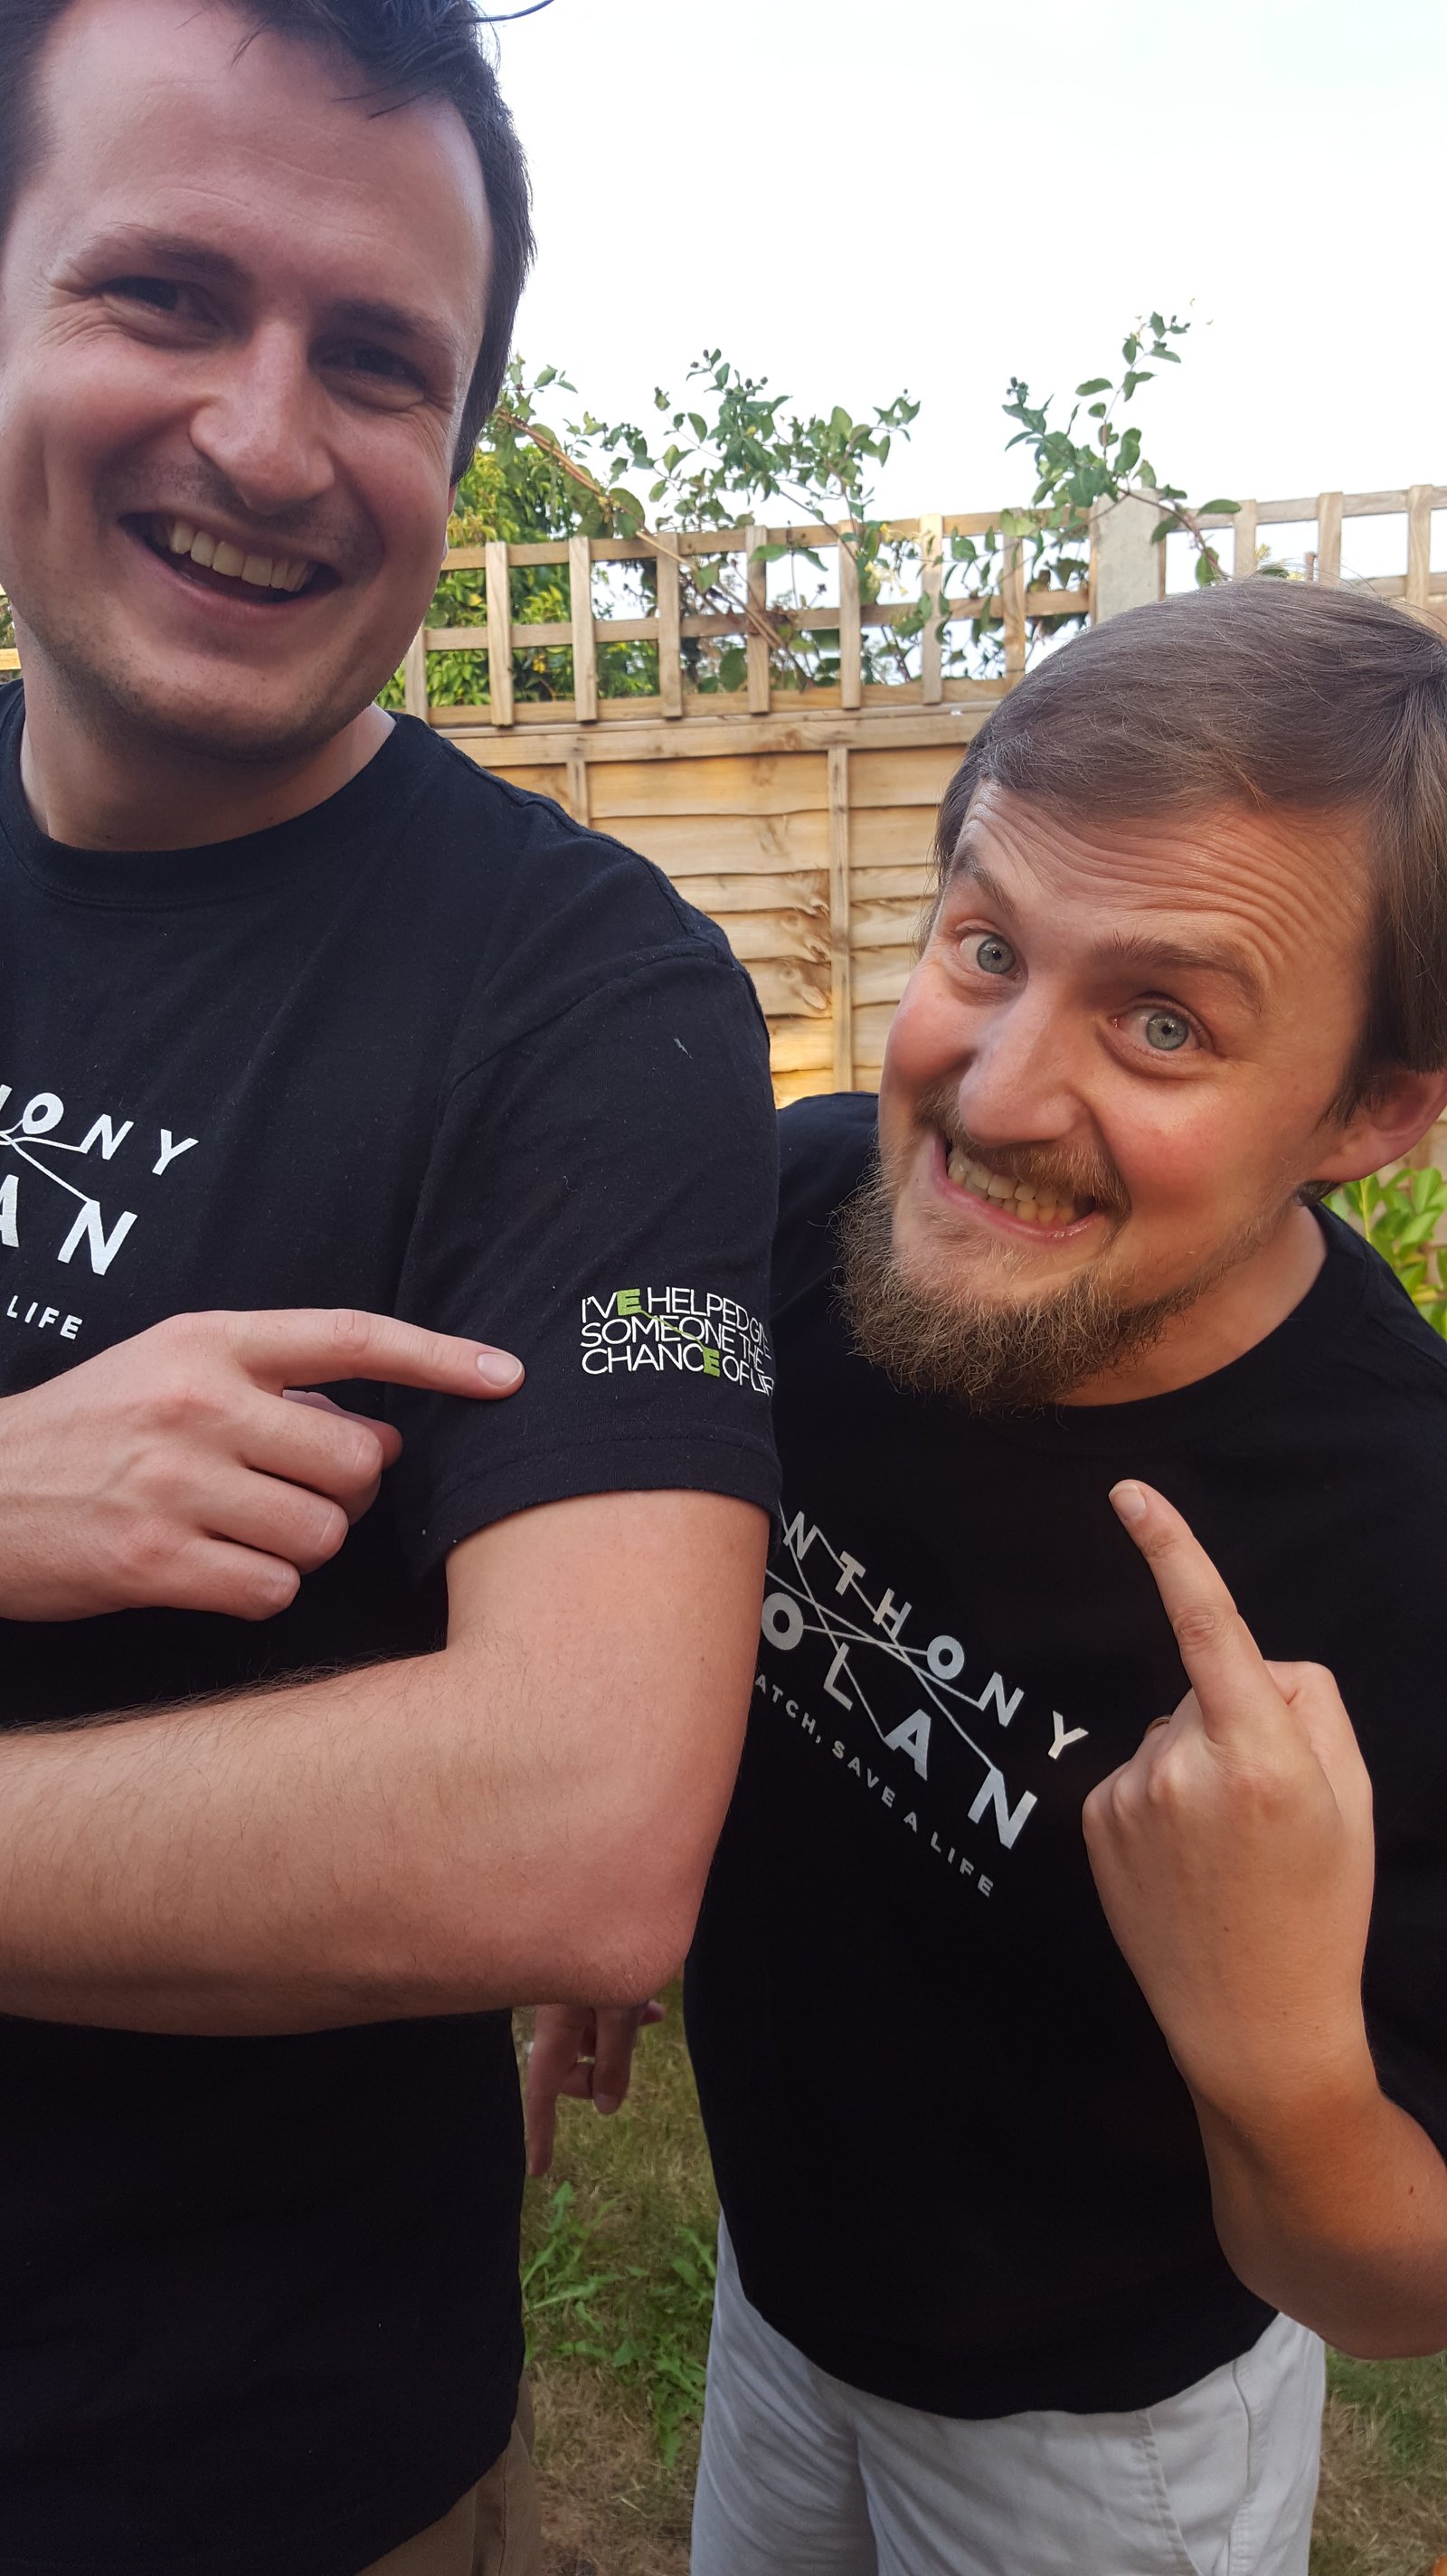 George and Tim in Anthony Nolan t-shirts (Be a match, save a life)